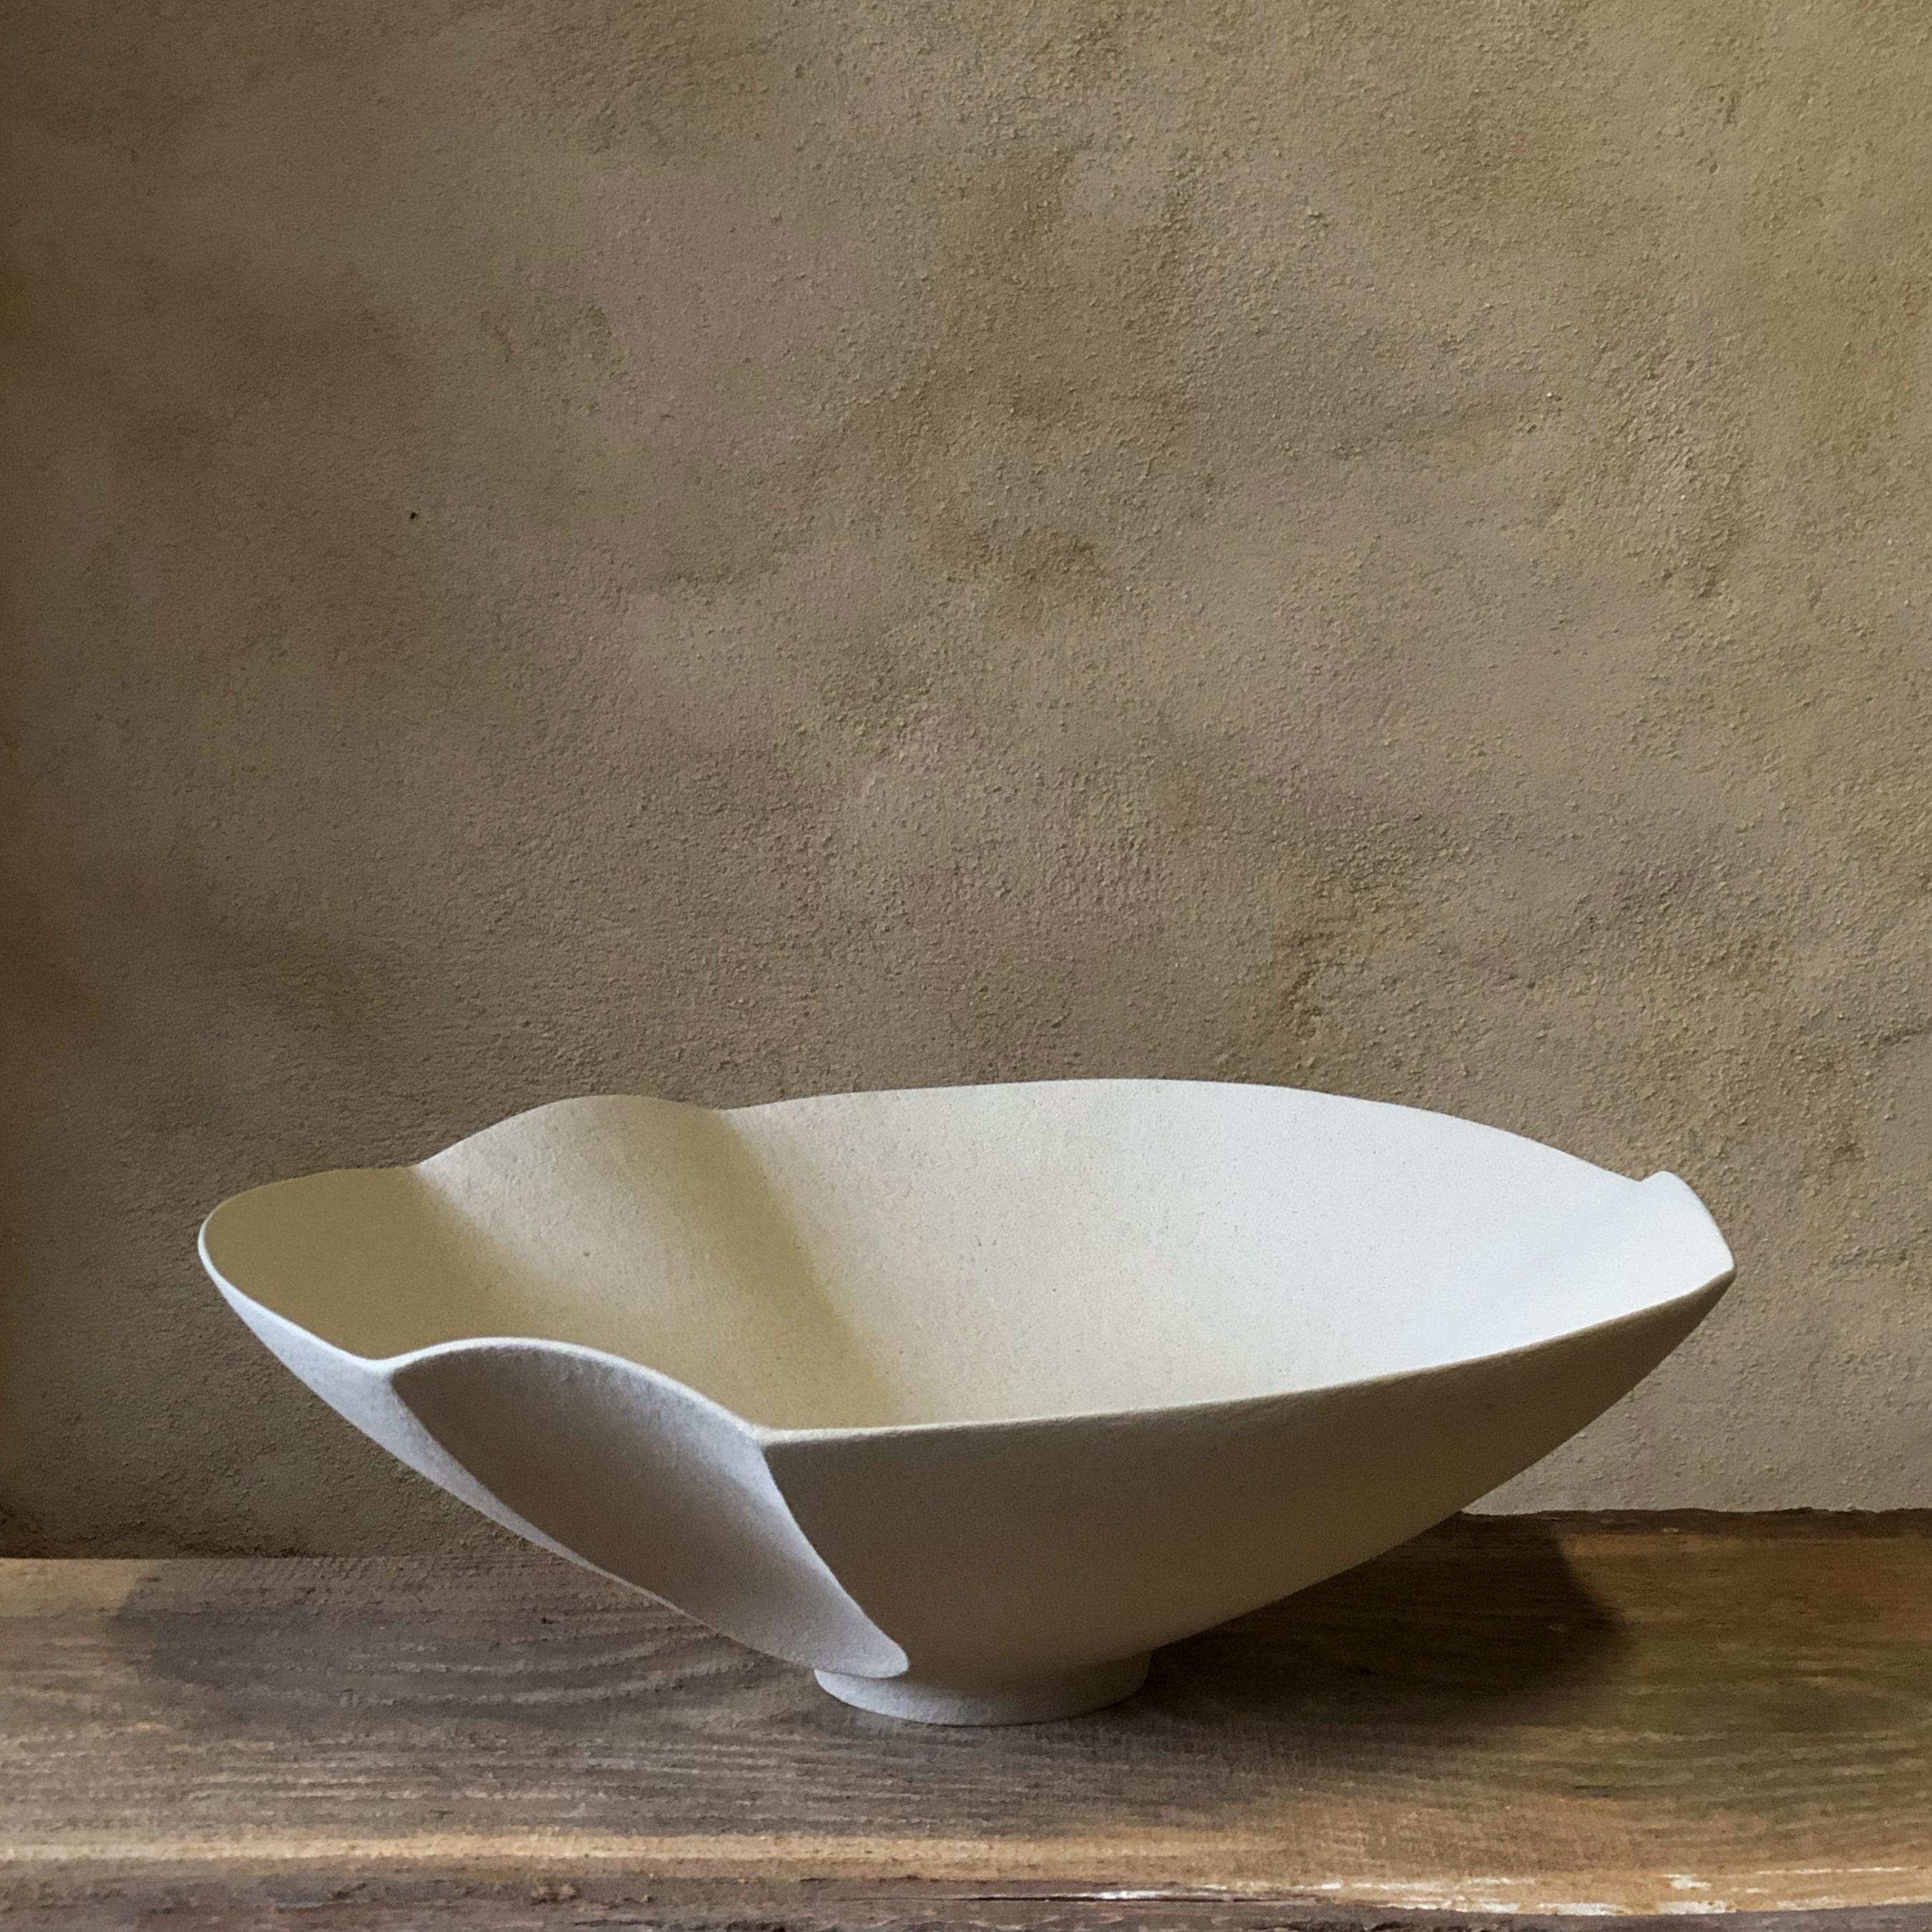 Faceted Low Bowl by Sophie Vaidie
One Of A Kind.
Dimensions: Ø 43 x H 14,5 cm. 
Materials: Brutal Beige stoneware with fine chamotte.

In the beginning, there was a need to make, with the hands, the touch, the senses. Then came the desire to create